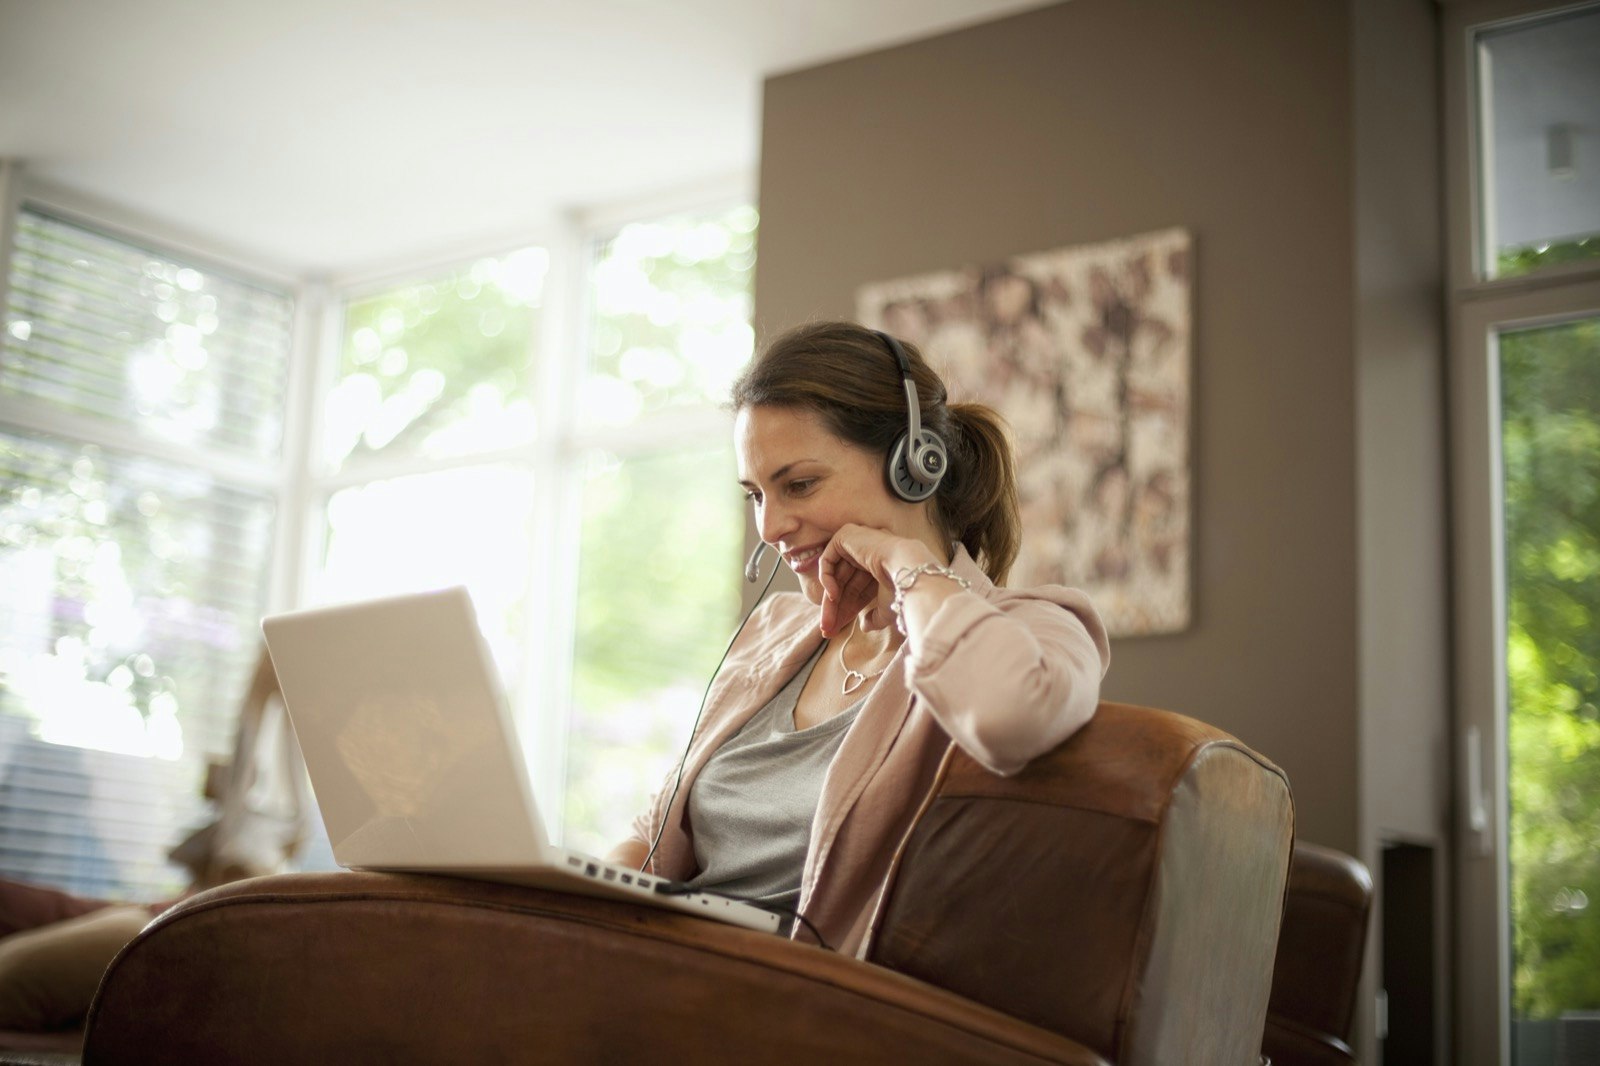 A woman uses headphones with a microphone as she sits alone with a laptop